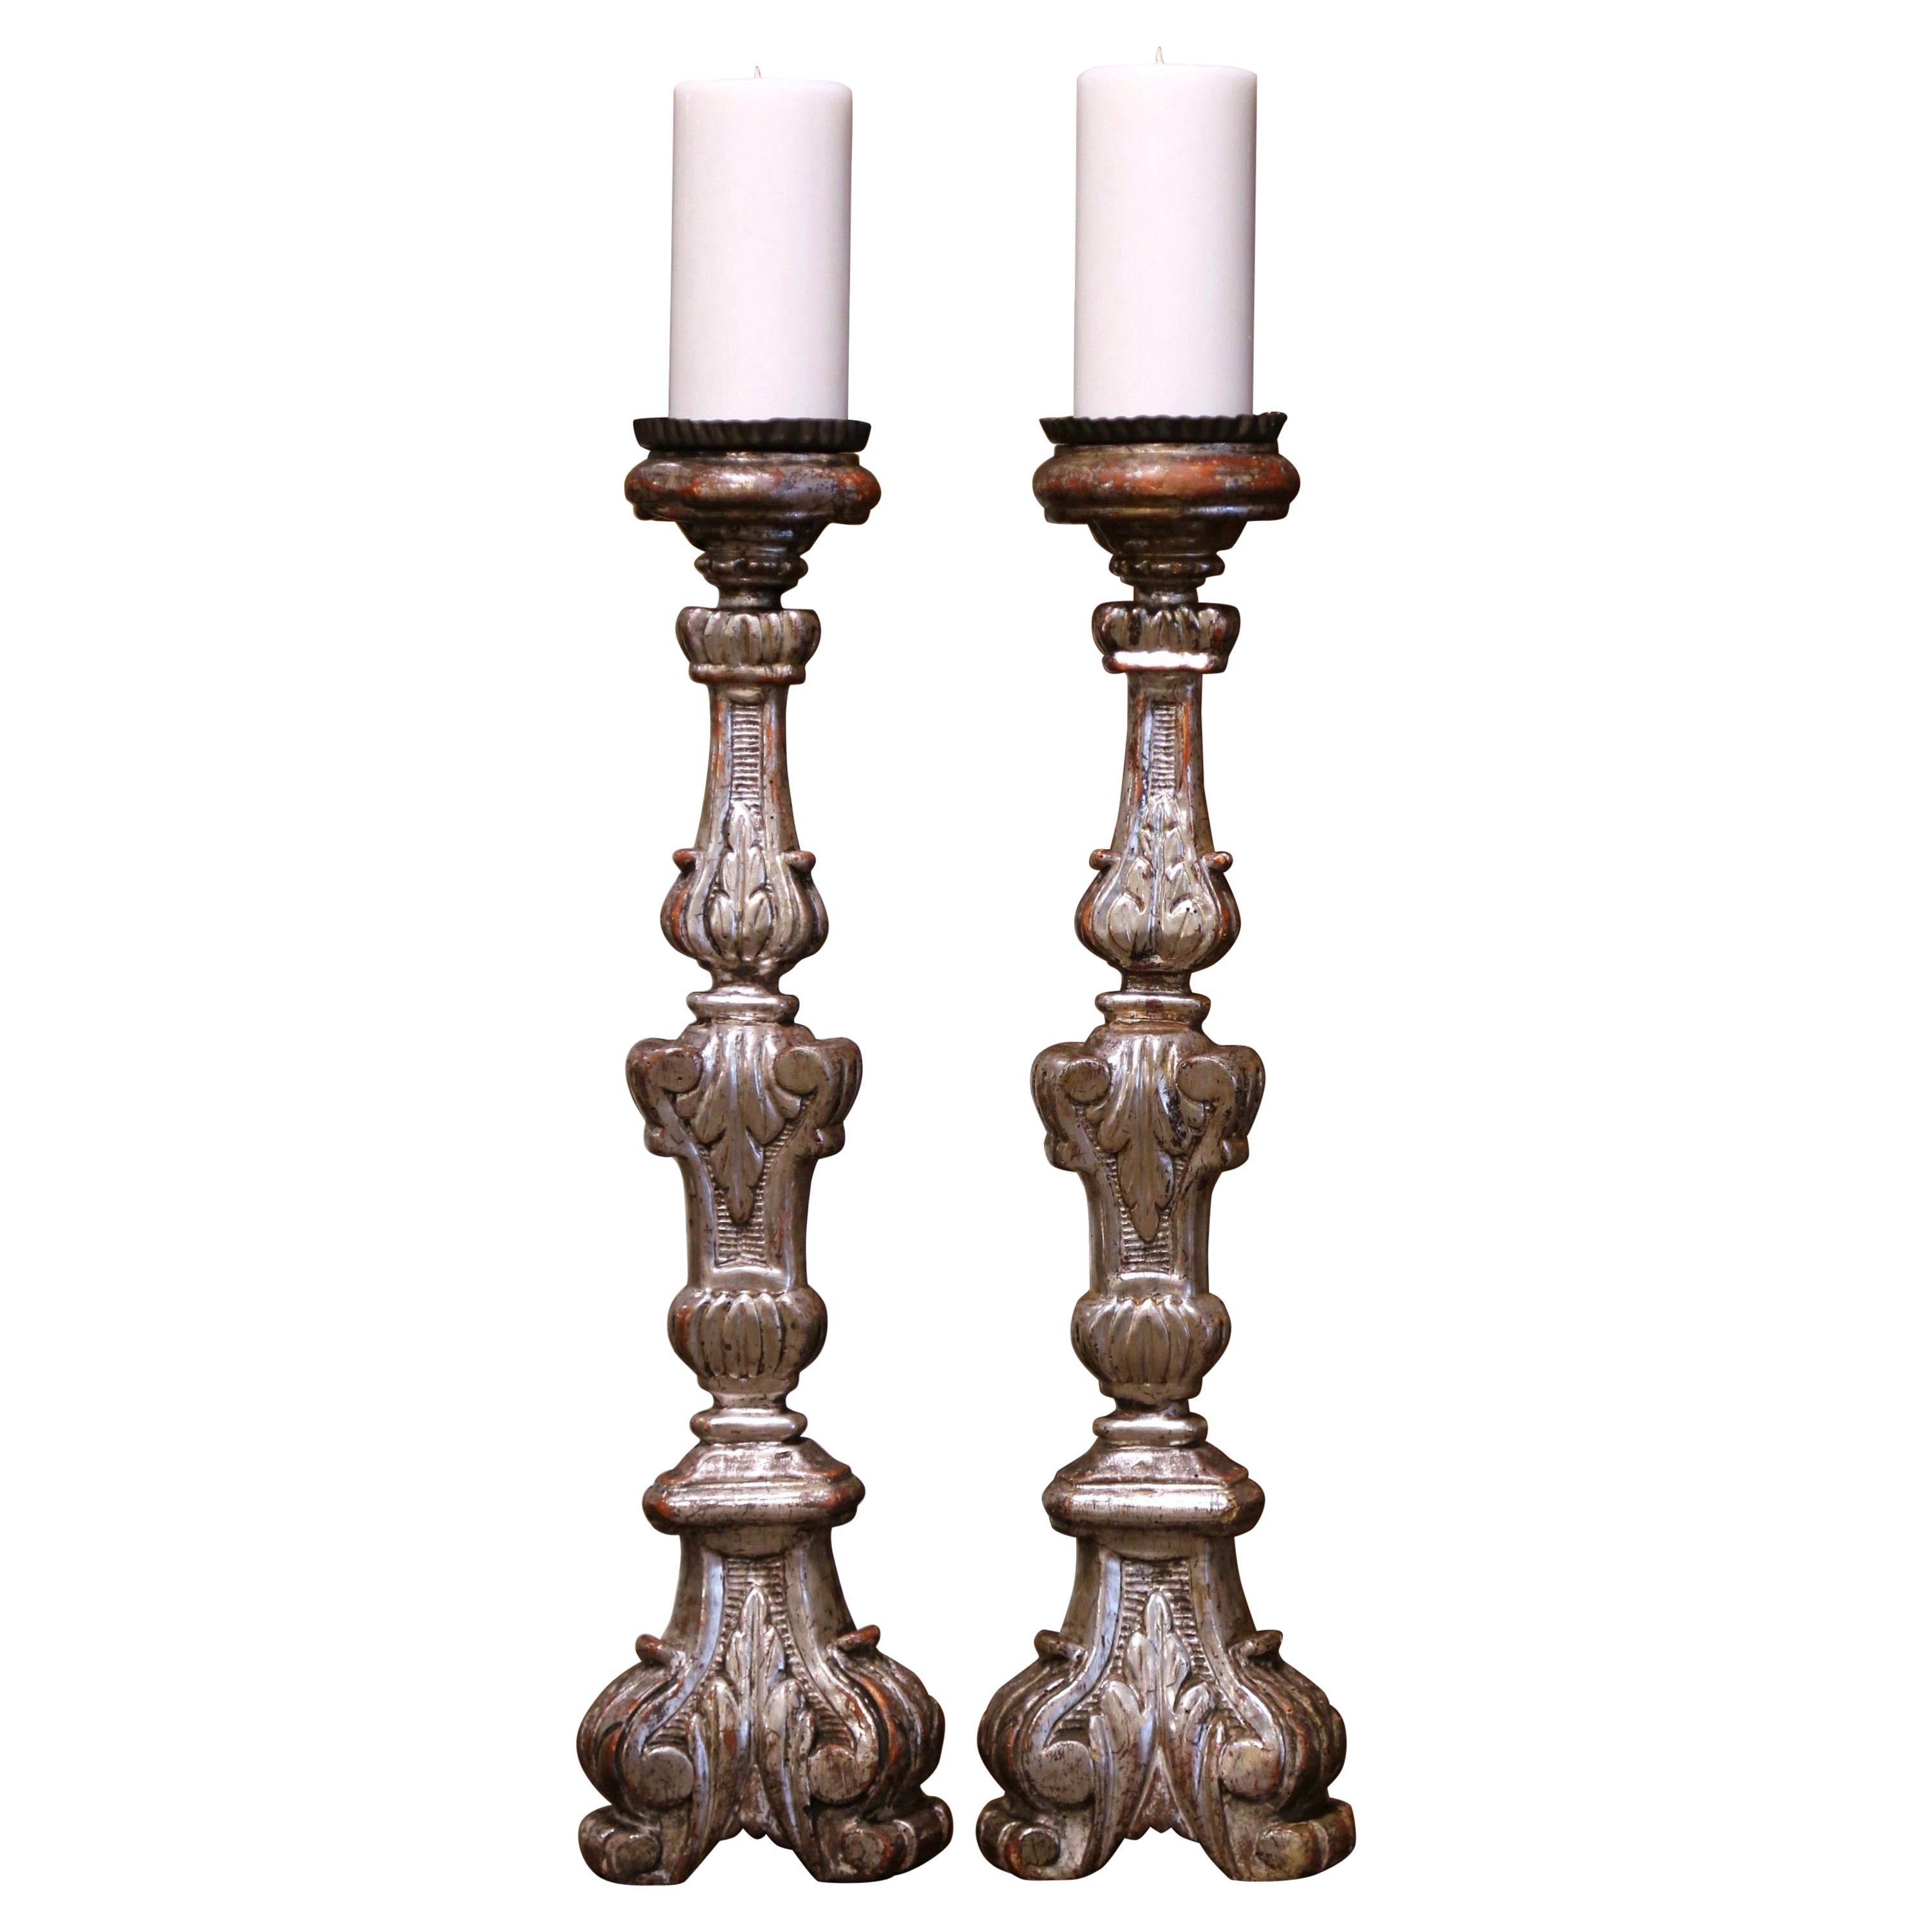 Pair of 19th Century Italian Carved Silver Leaf Candle Holders